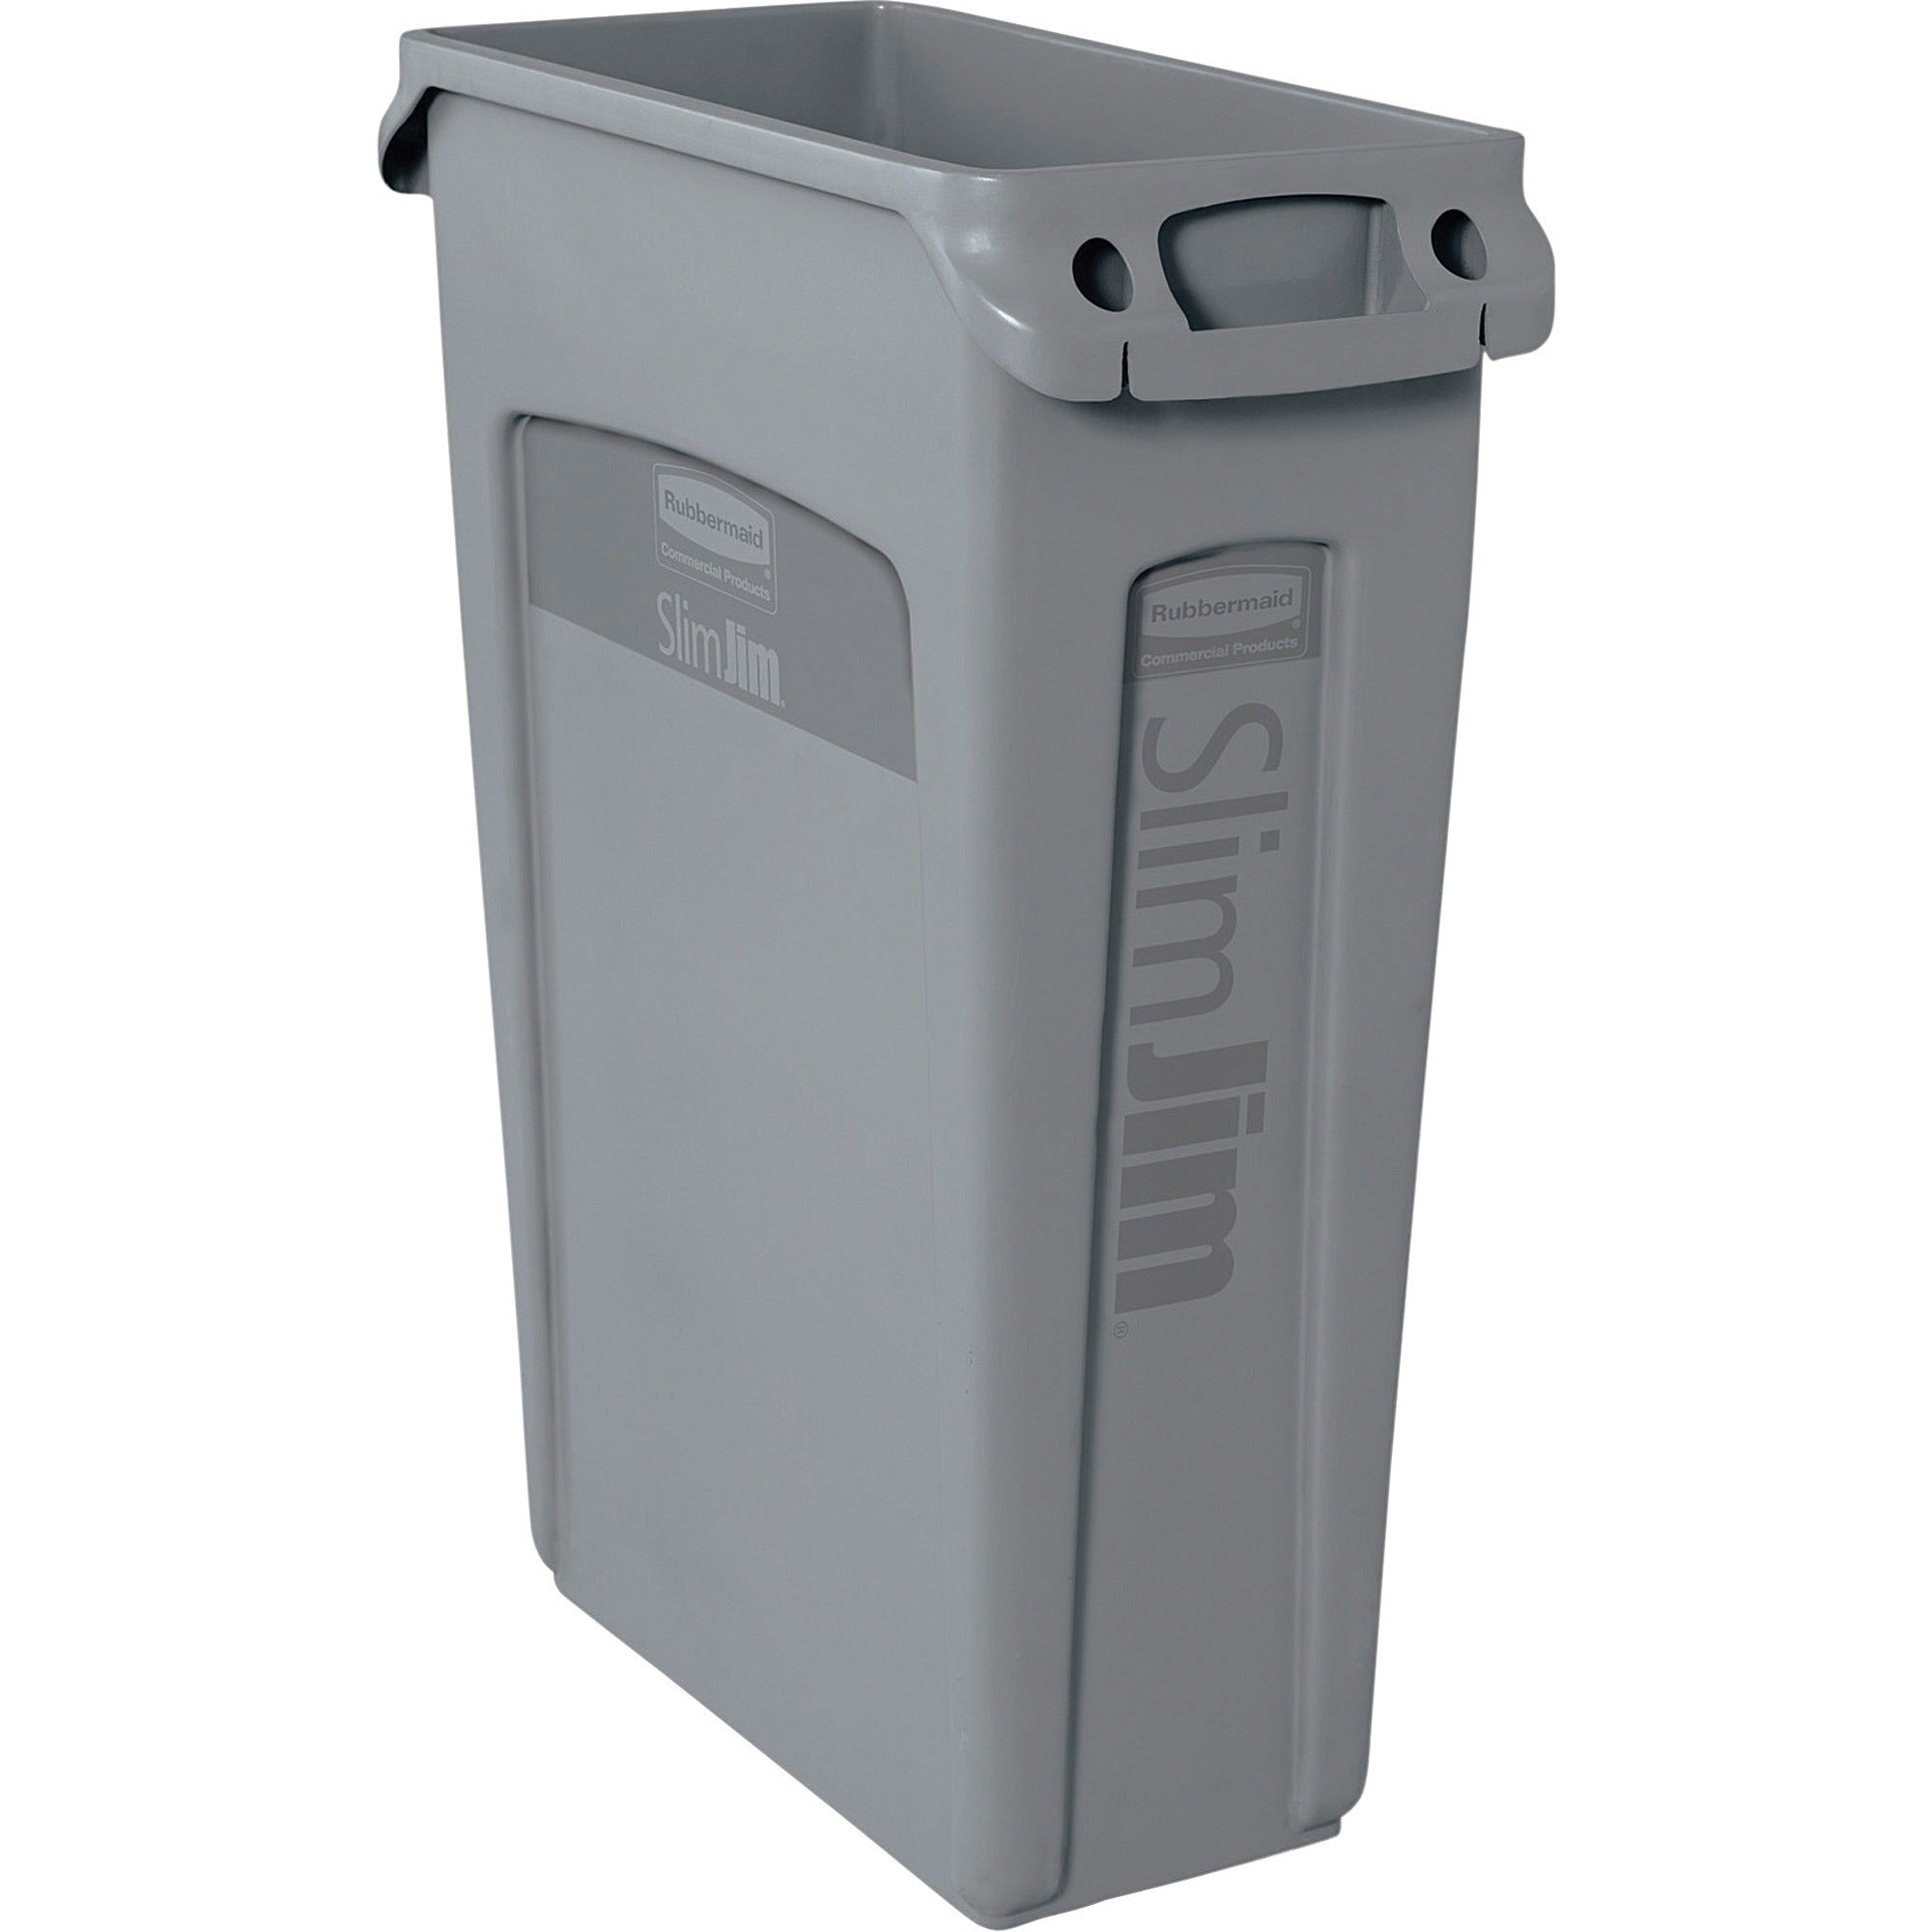 rubbermaid-commercial-slim-jim-23-gallon-vented-waste-containers-23-gal-capacity-rectangular-durable-handle-30-height-x-11-width-x-22-depth-gray-4-carton_rcp354060gyct - 1